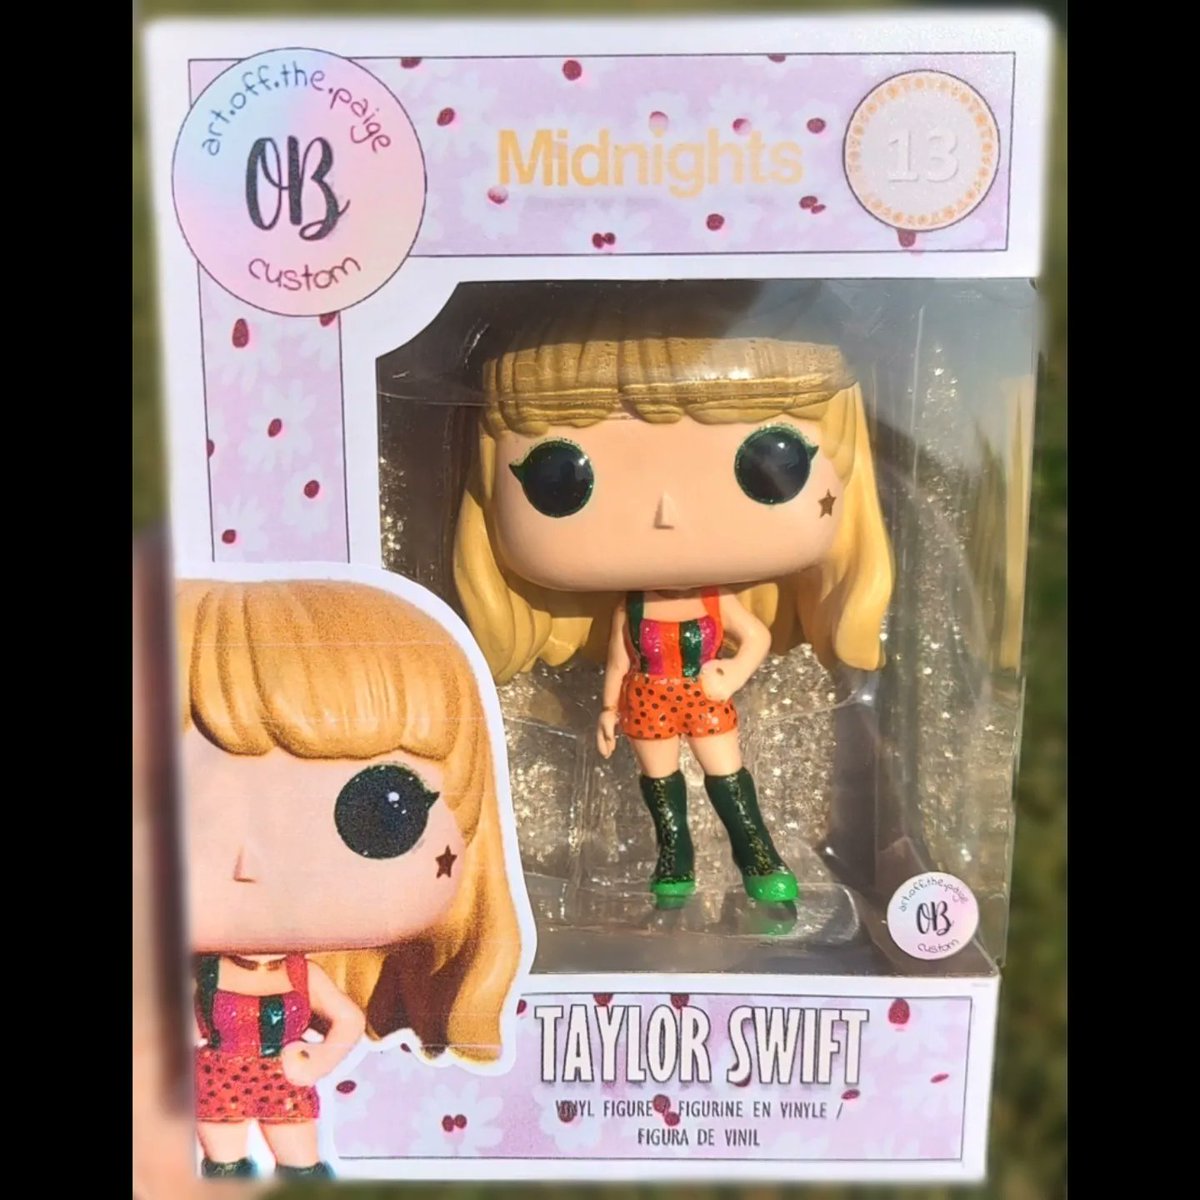 art.off.the.paige / Olivia on X: *Personalized* Taylor Swift You Belong  with Me Custom Funko Pop 💛 #taylor #swift #taylorswift #swiftie #swifties  #taylornation #fearless #fearlesstaylorsversion #vault #folklore #red  #youbelongwithme #art #paint